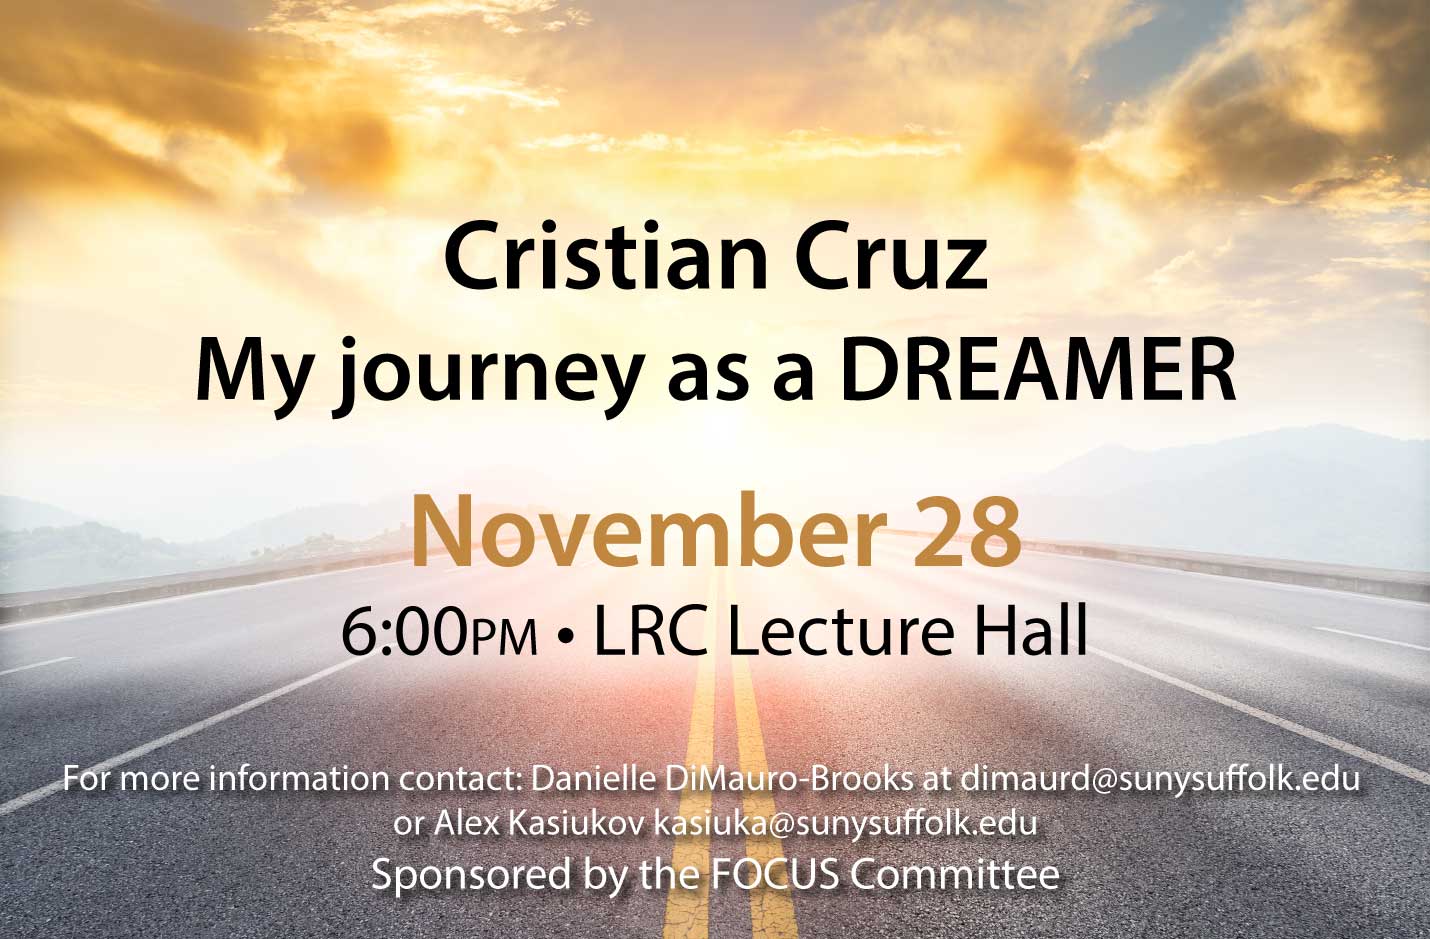 The Real Journey of a Dreamer - FOCUS Committee - November 28, 2018 Event Flyer